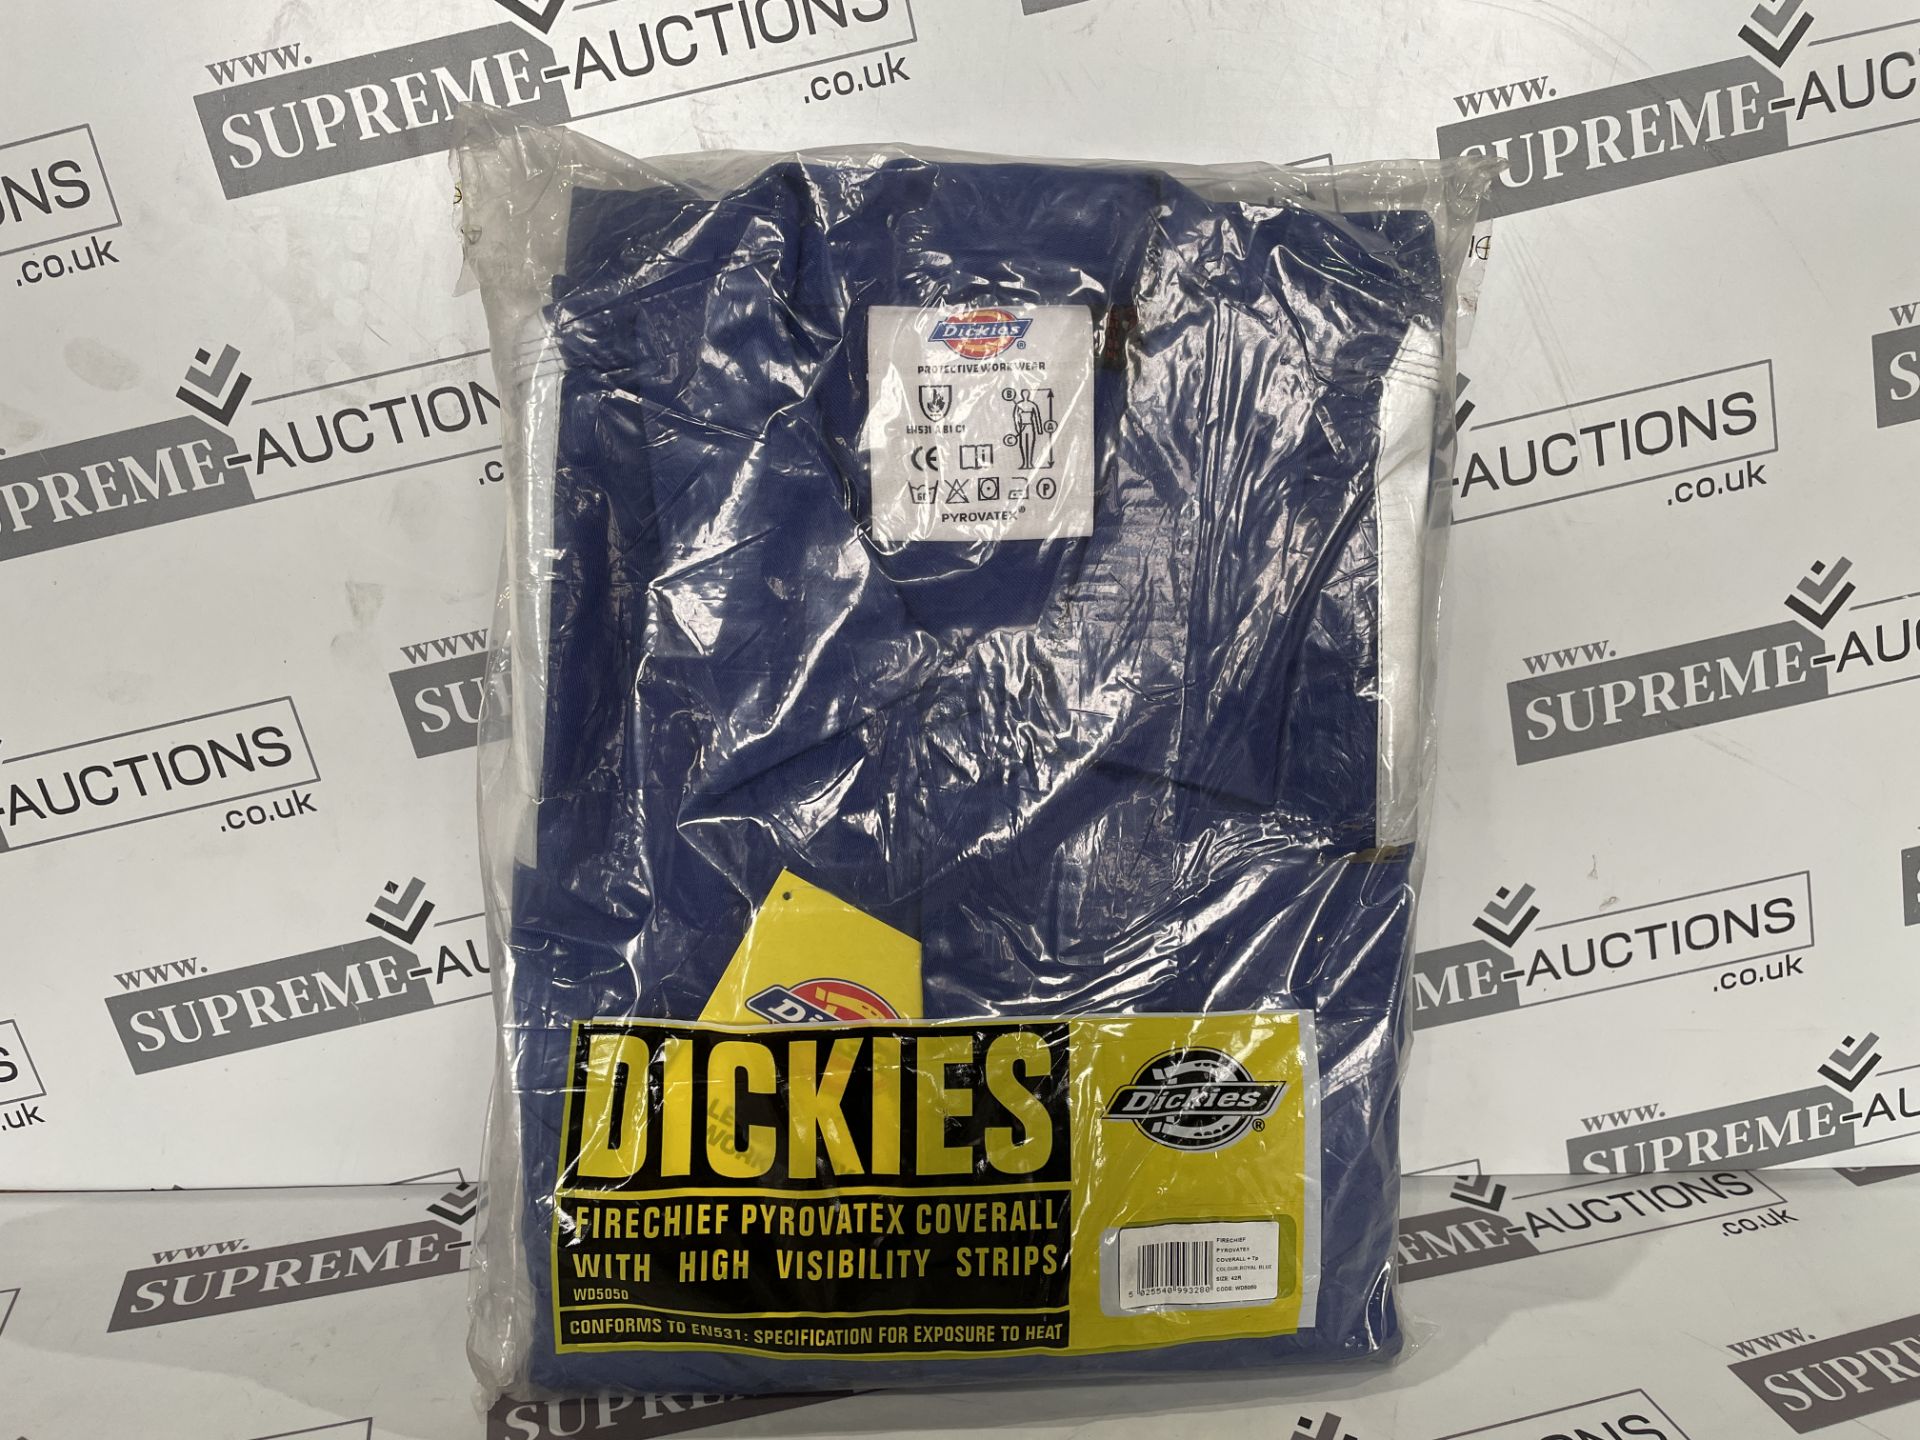 5 X BRAND NEW DICKIES FIRECHIEF PYROVATEX COVERALLS WITH HI VIZ STRIPS NAVY SIZE 52R R3-4